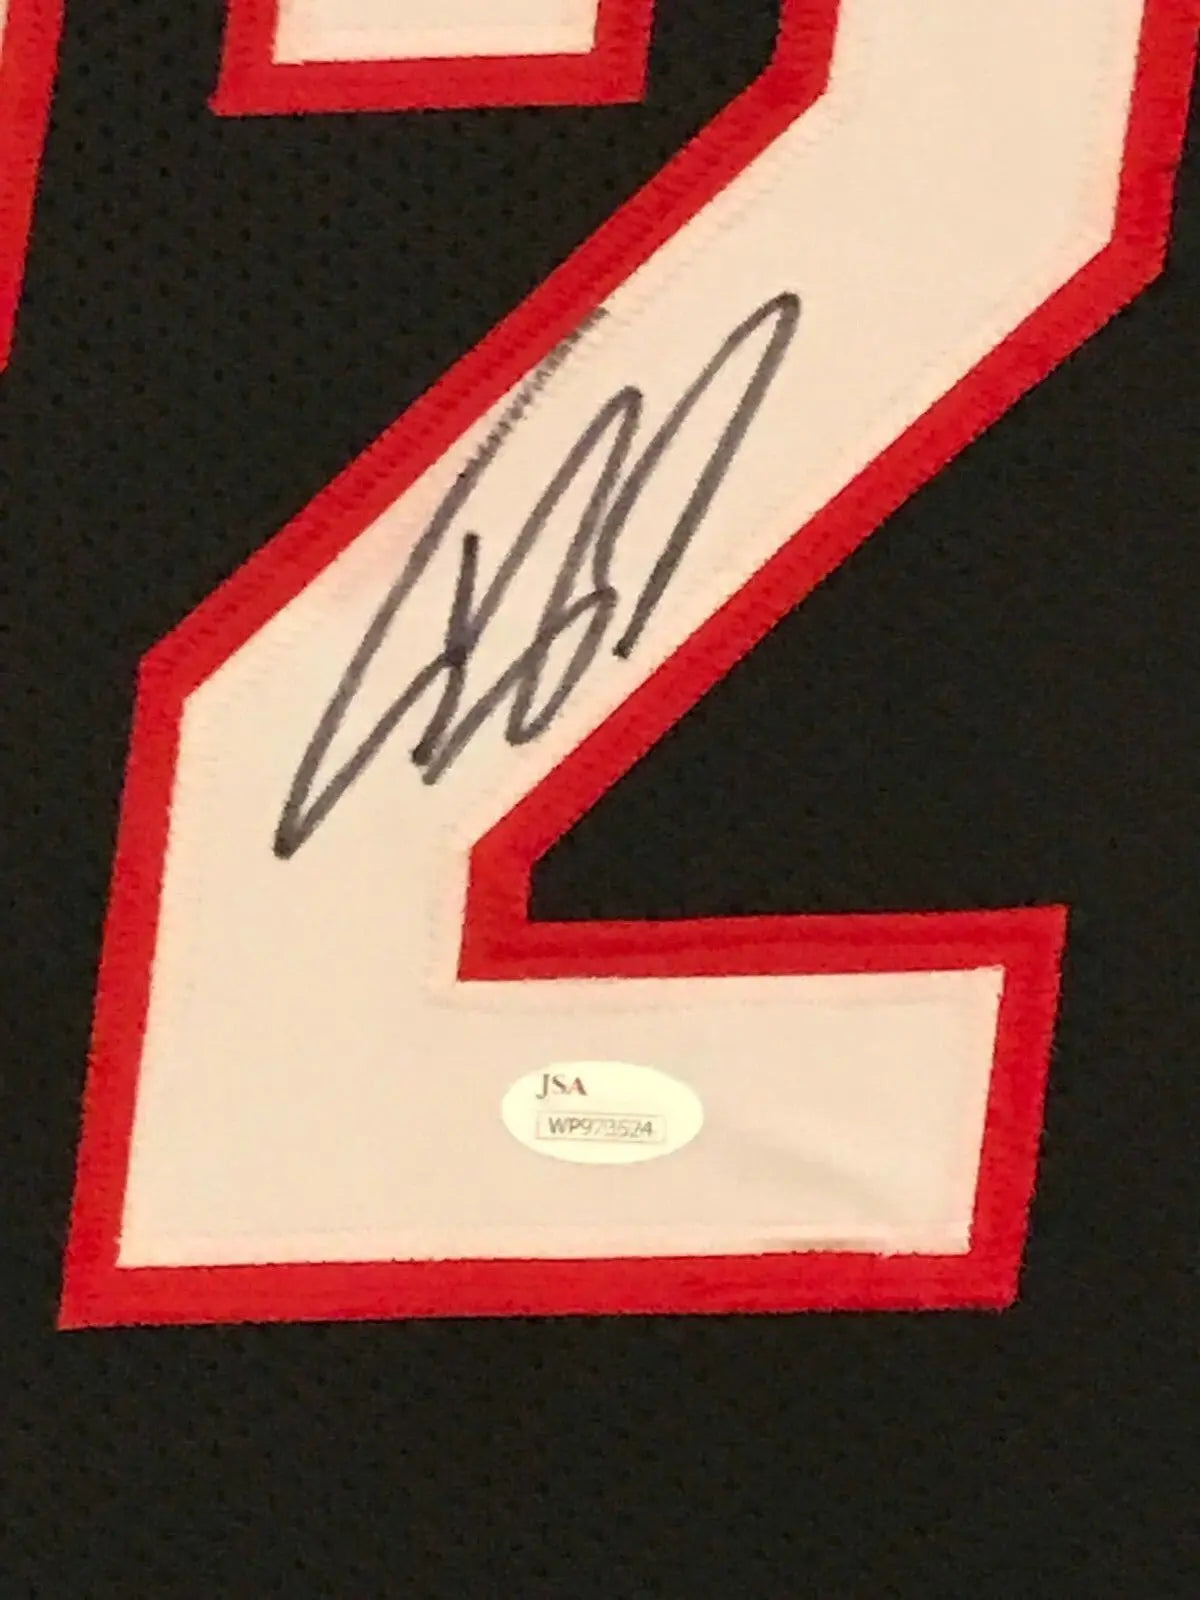 MVP Authentics Framed Miami Heat Shaquille O'neal Autographed Signed Jersey Jsa Coa 449.10 sports jersey framing , jersey framing